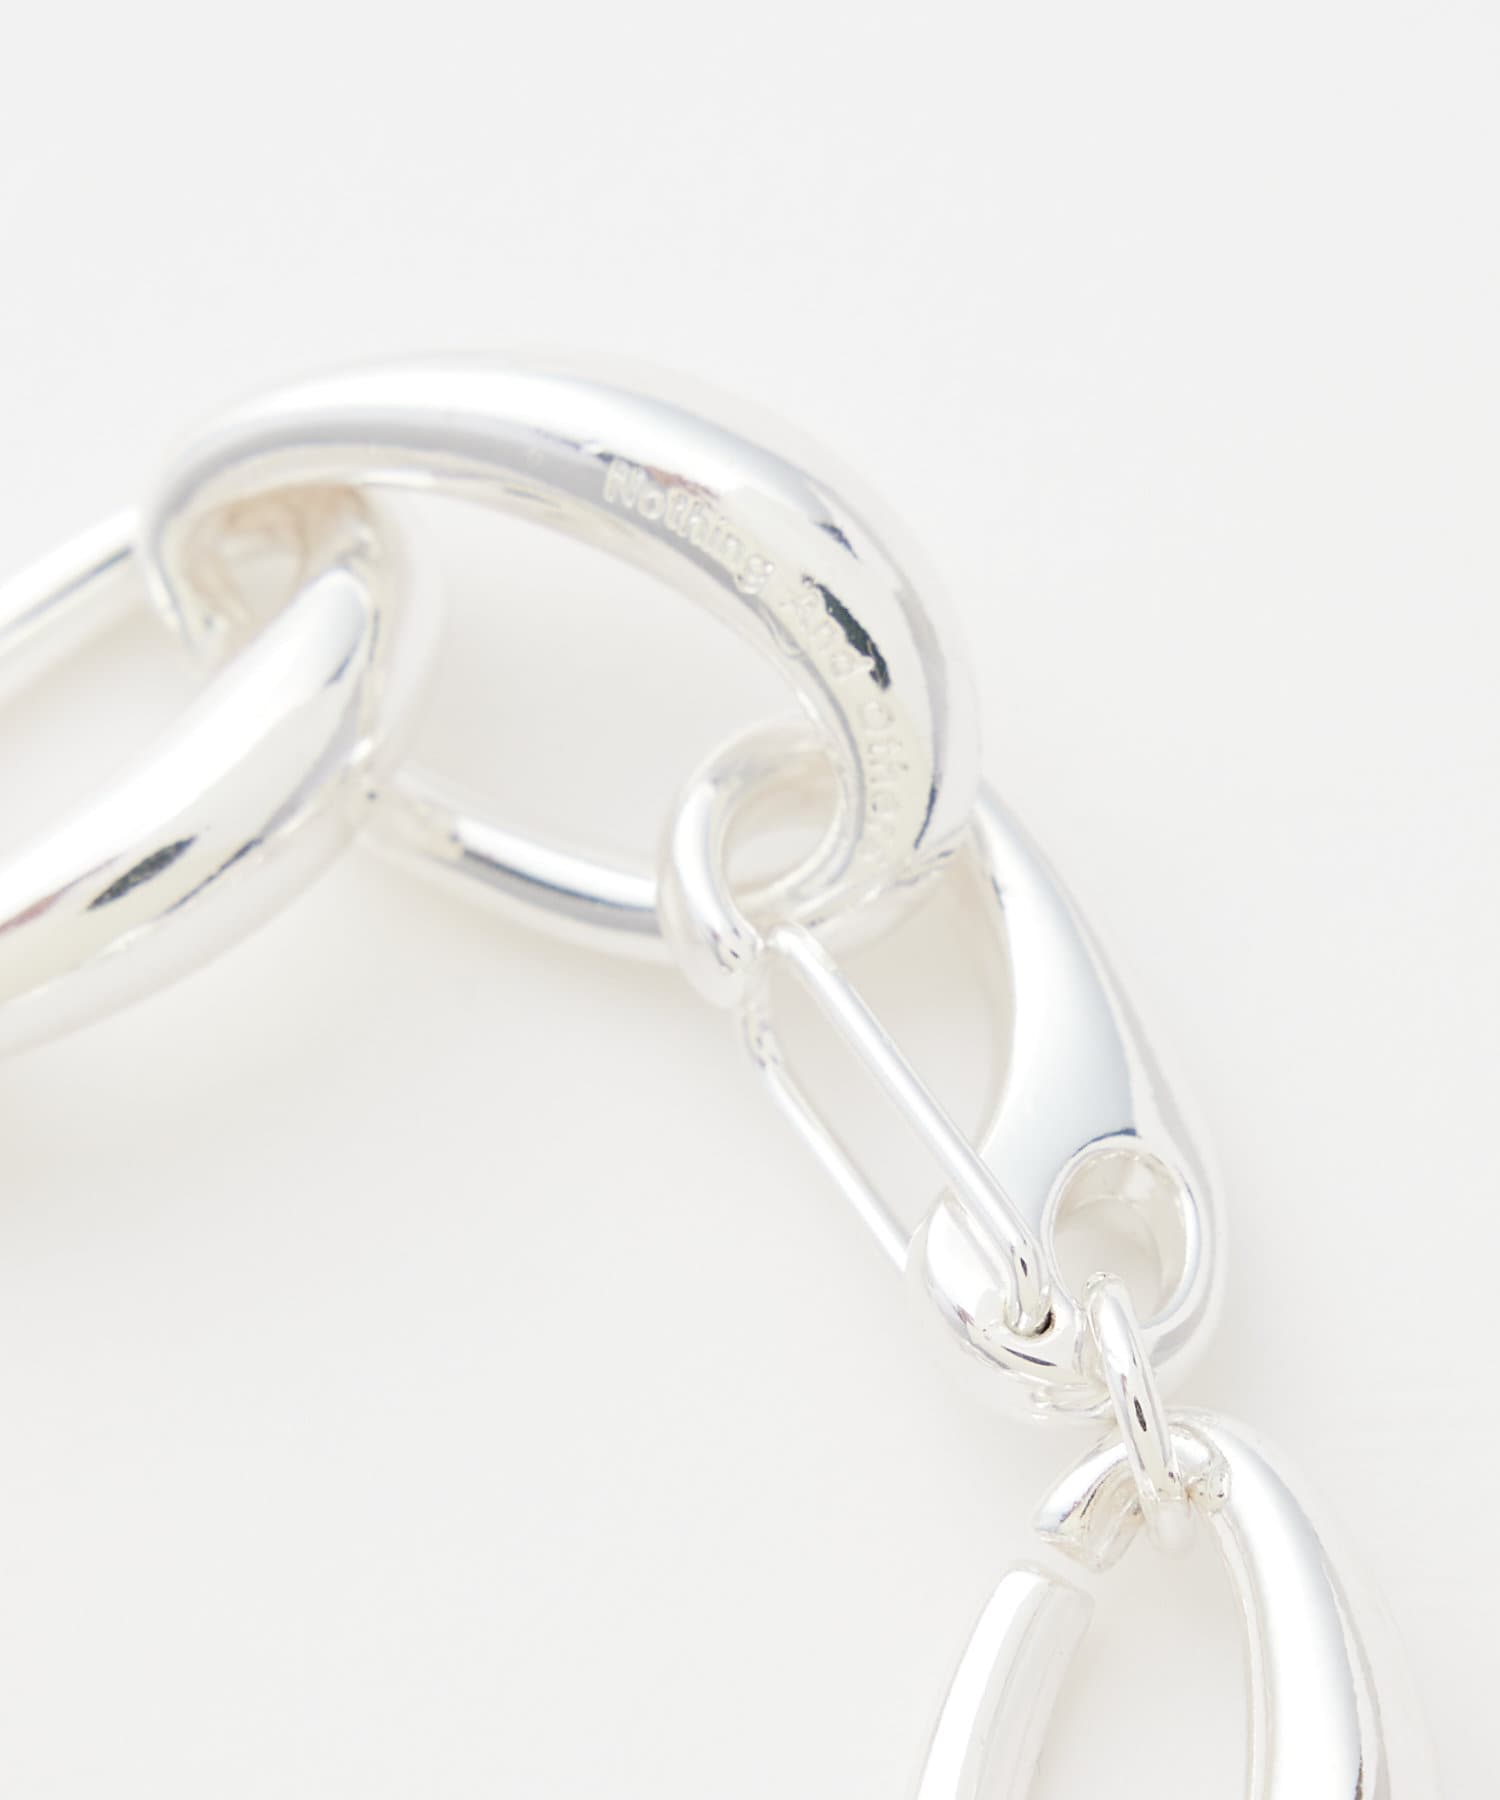 RIVE DROITE(リヴドロワ) 【Nothing And Others】Drop ring Bracelet